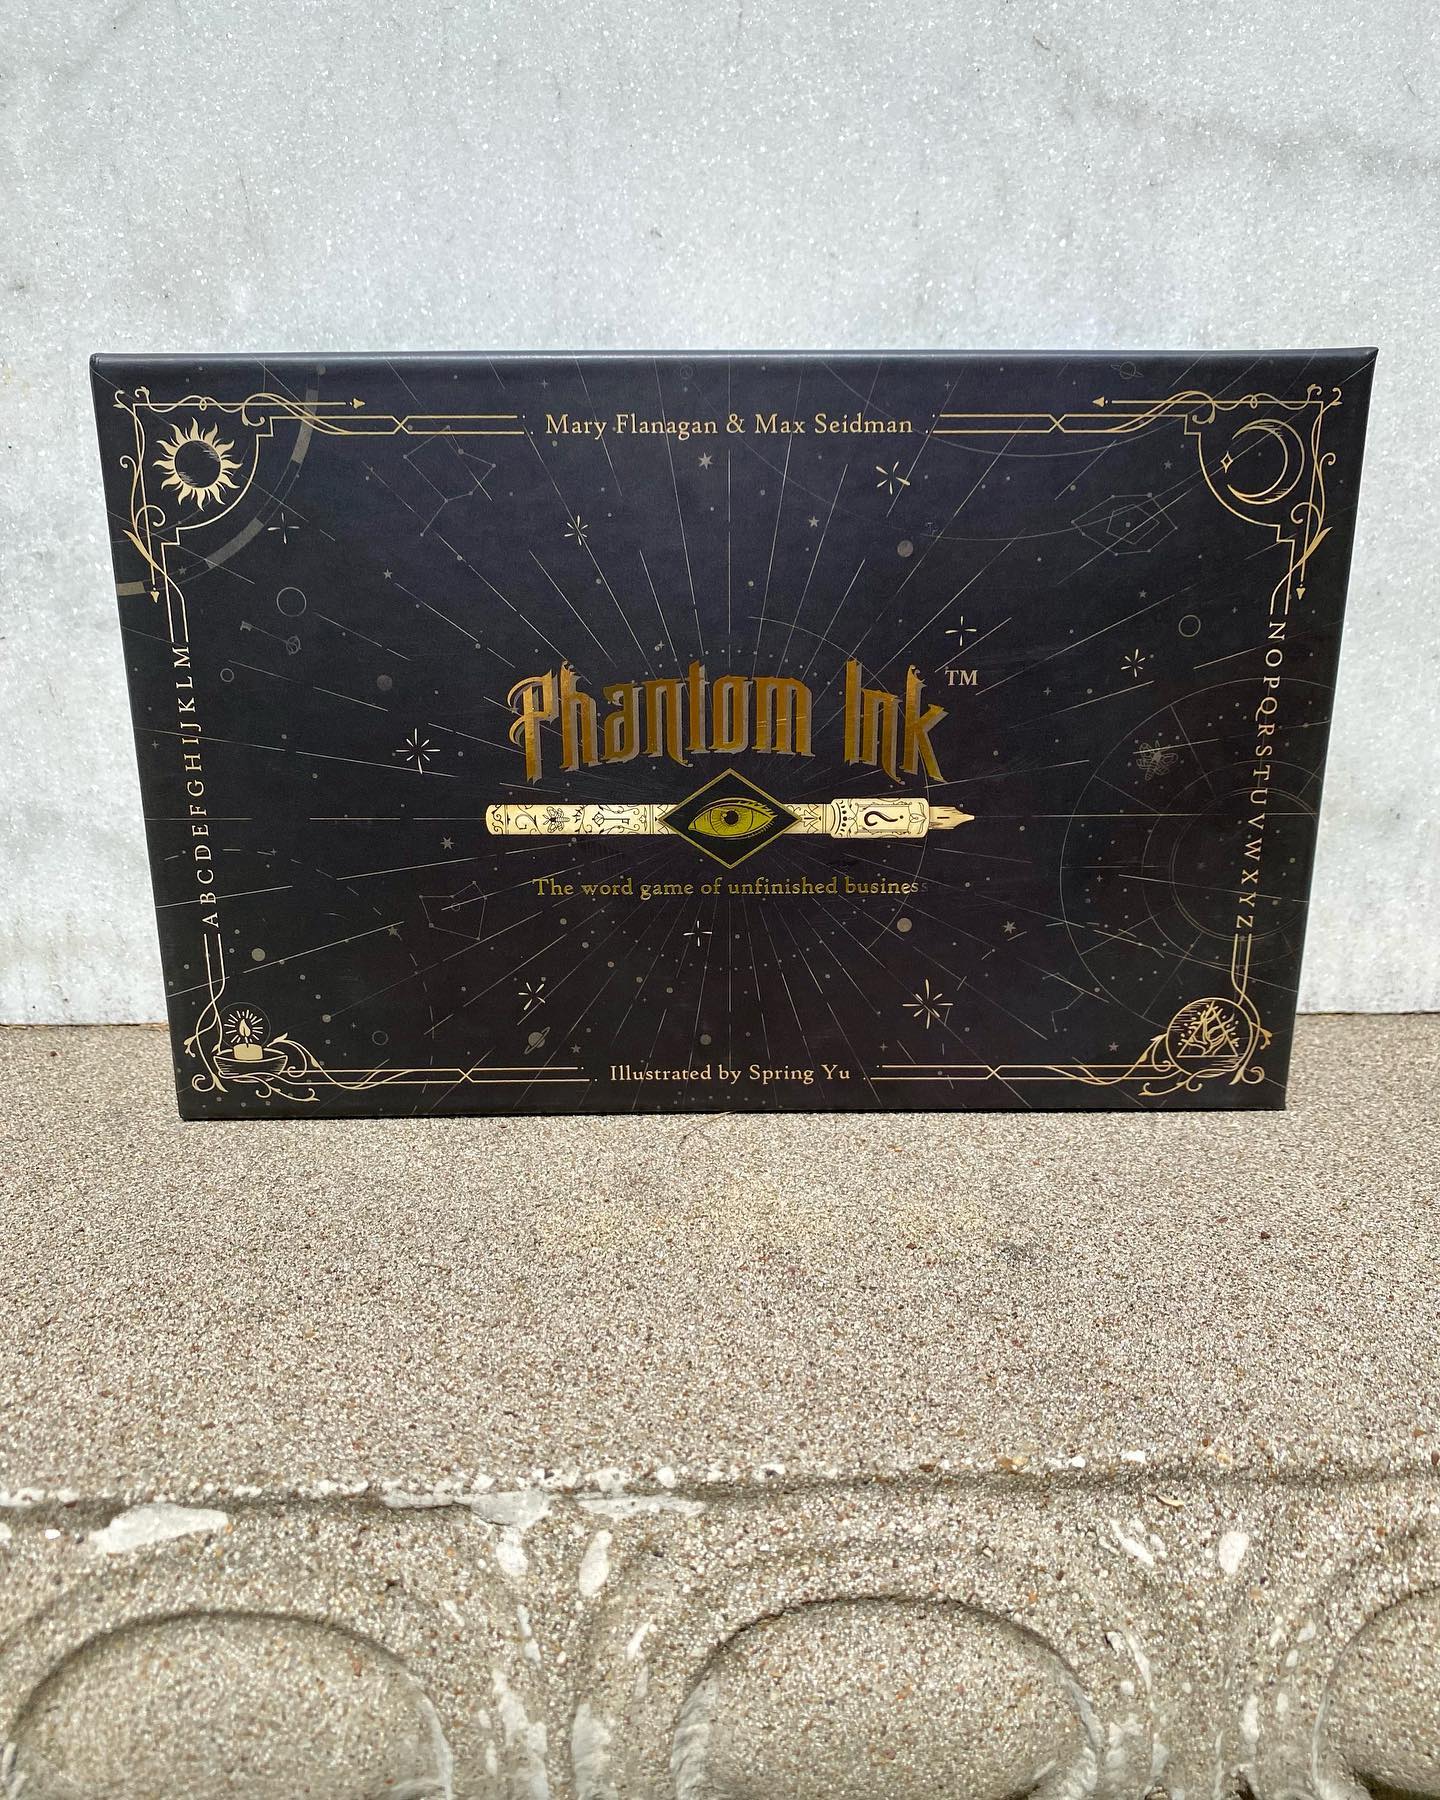 We are officially sold out of Phantom Ink!! Don’t worry, there are still ways to contact the spirits. You can get Phantom Ink right now at Barnes & Noble, Books-A-Million, or at your local game store! Just ask them to carry Resonym games, and you can get your first seance started 🕯

#game #boardgames #tabletopgames #wordgames #aesthetic #resonym #bgg #gamenight #indieboardgames #boardgamesofinstagram #boardgamenight #boardgamephotography #photography #ghost #spirit